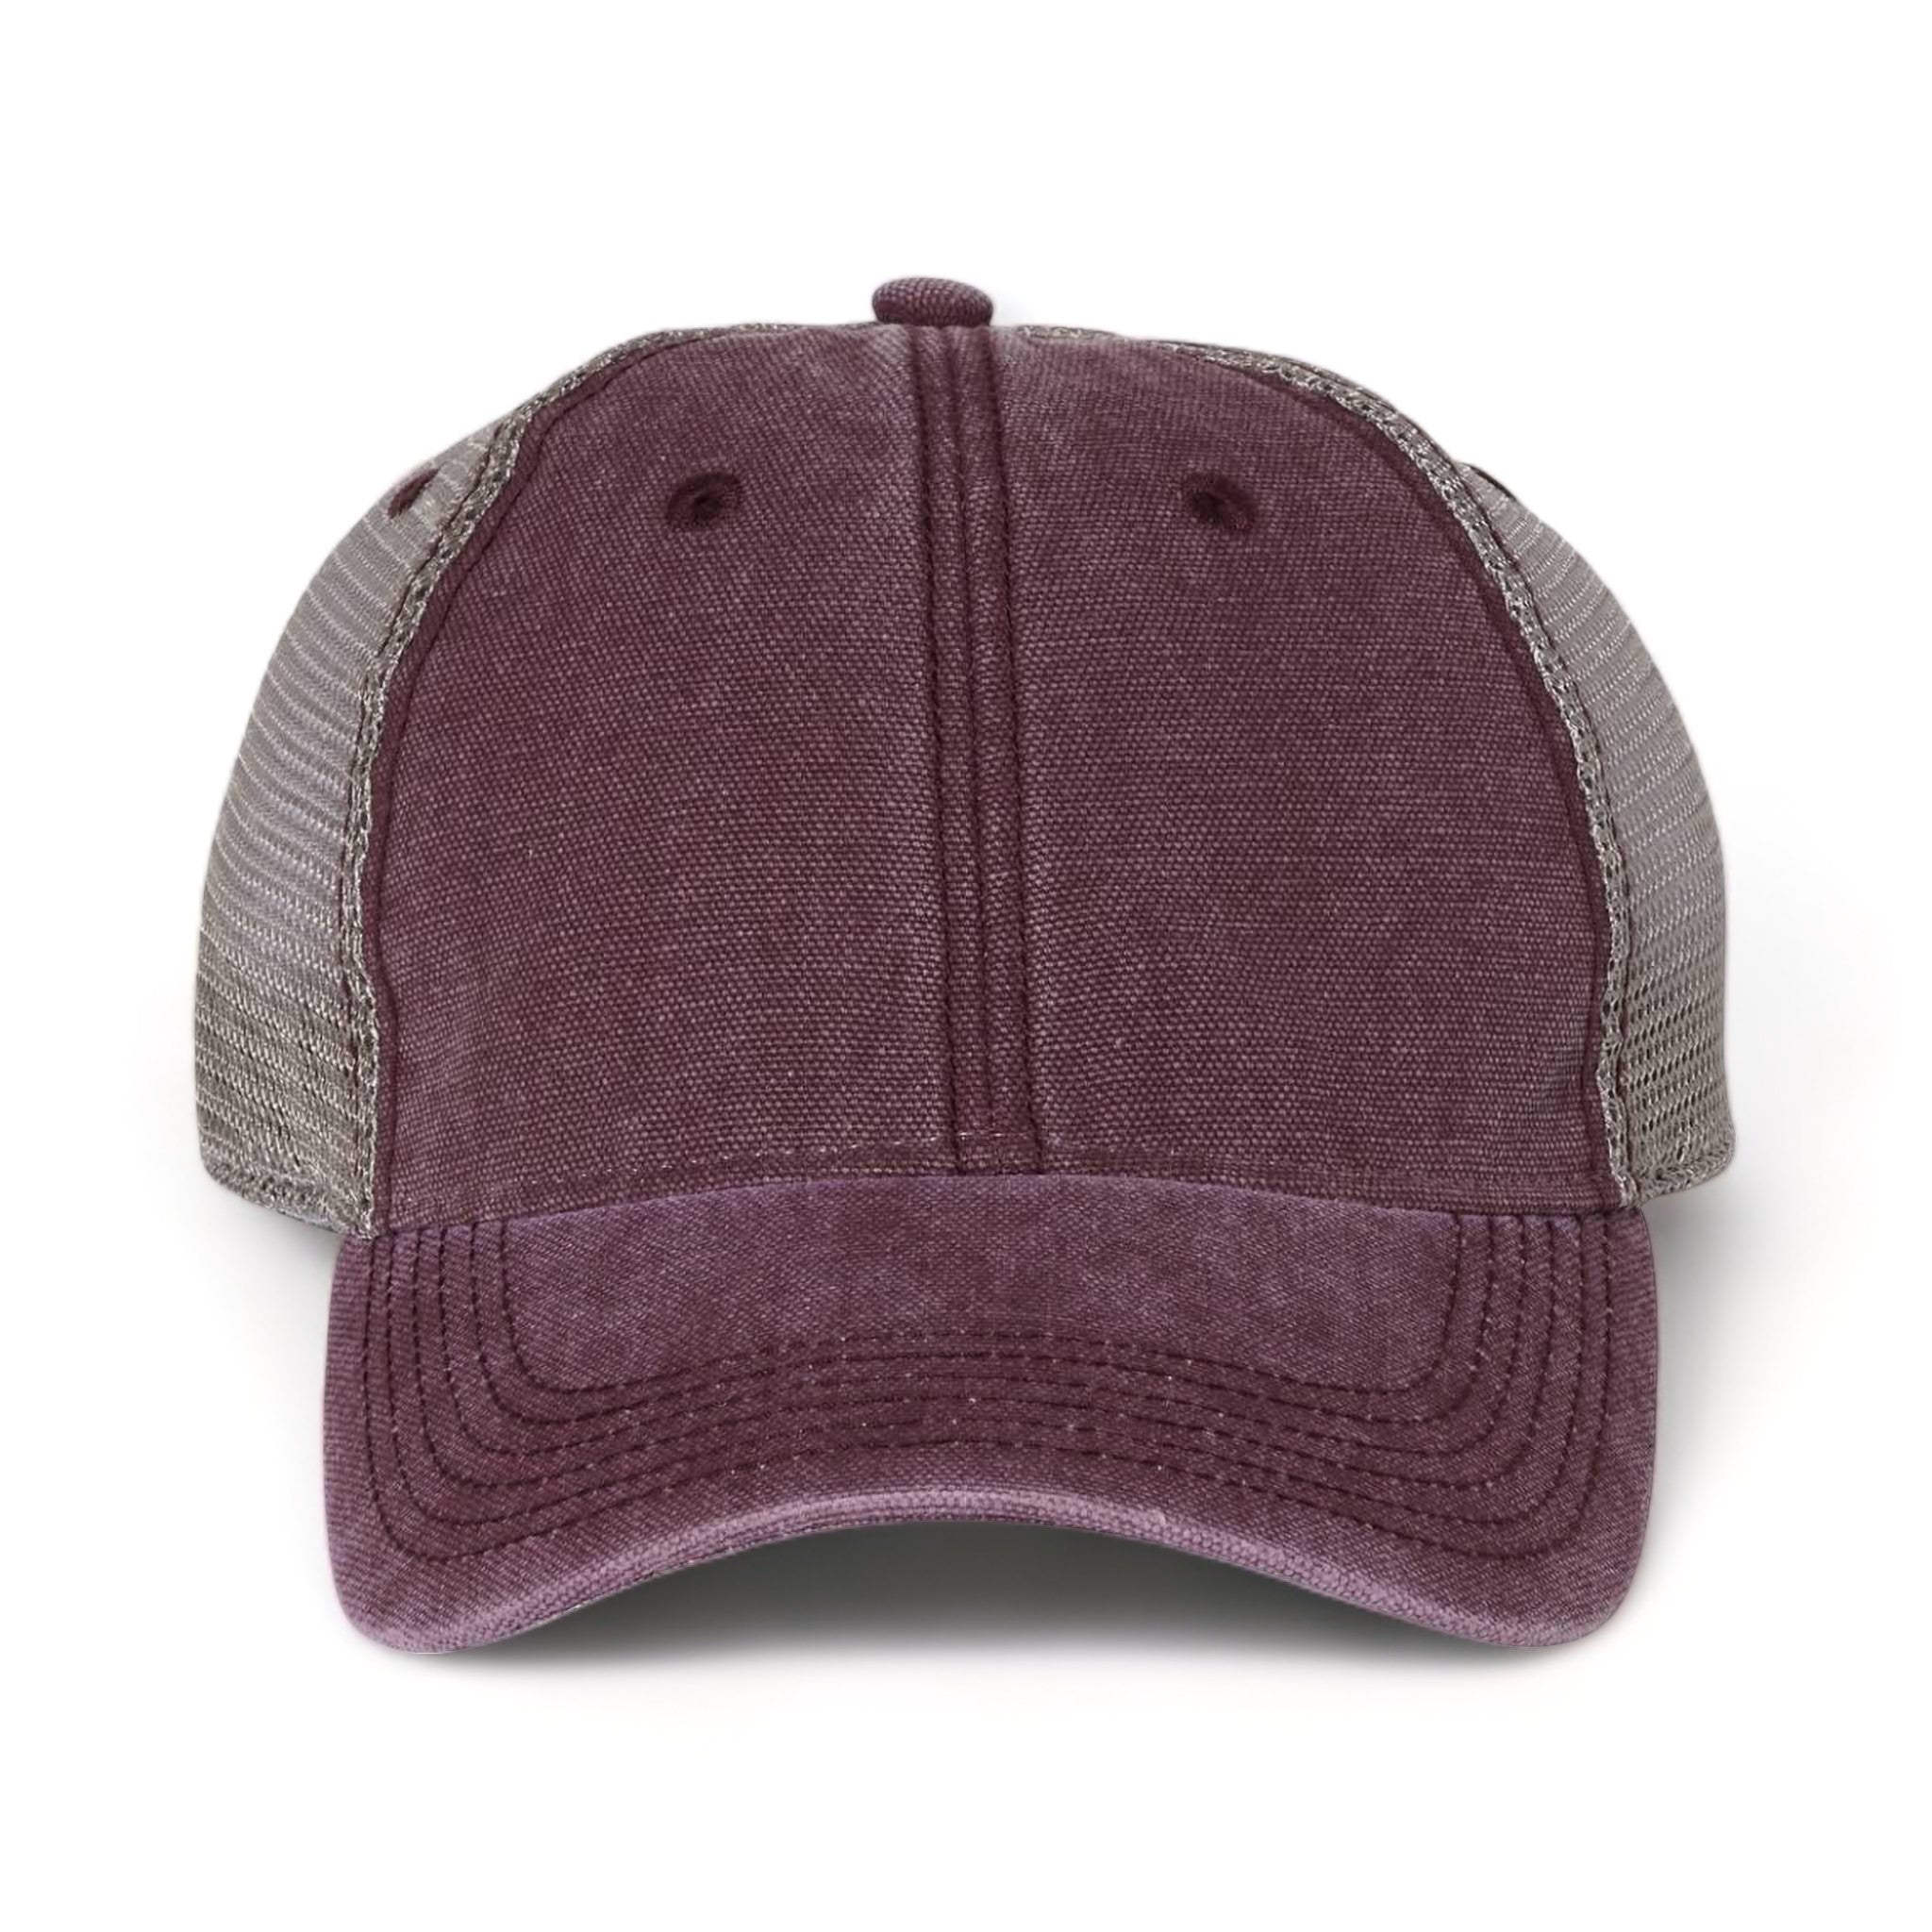 Front view of LEGACY DTA custom hat in burgundy and grey